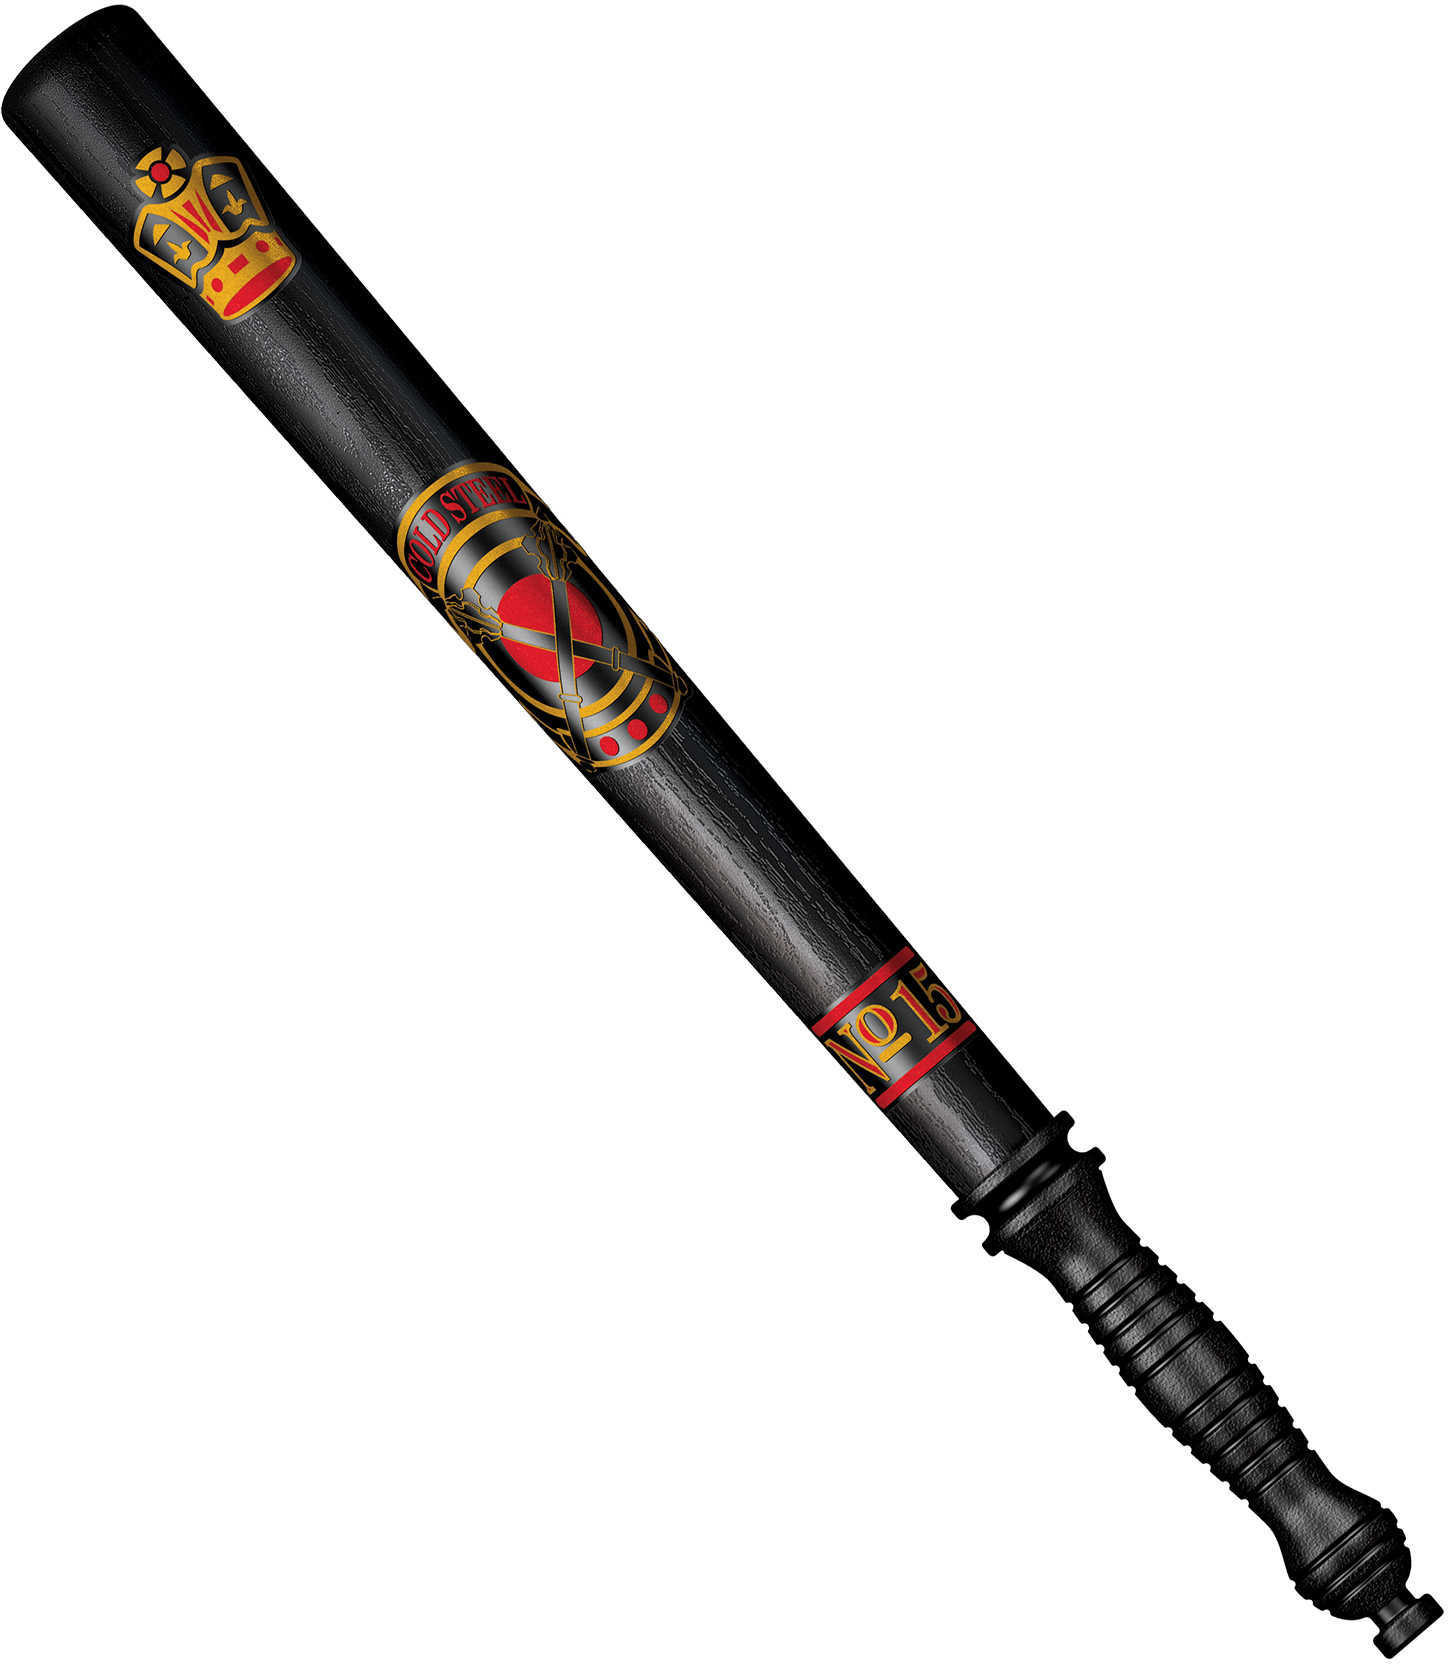 Cold Steel English Police Truncheon, Clam Package Md: 91NPETZ